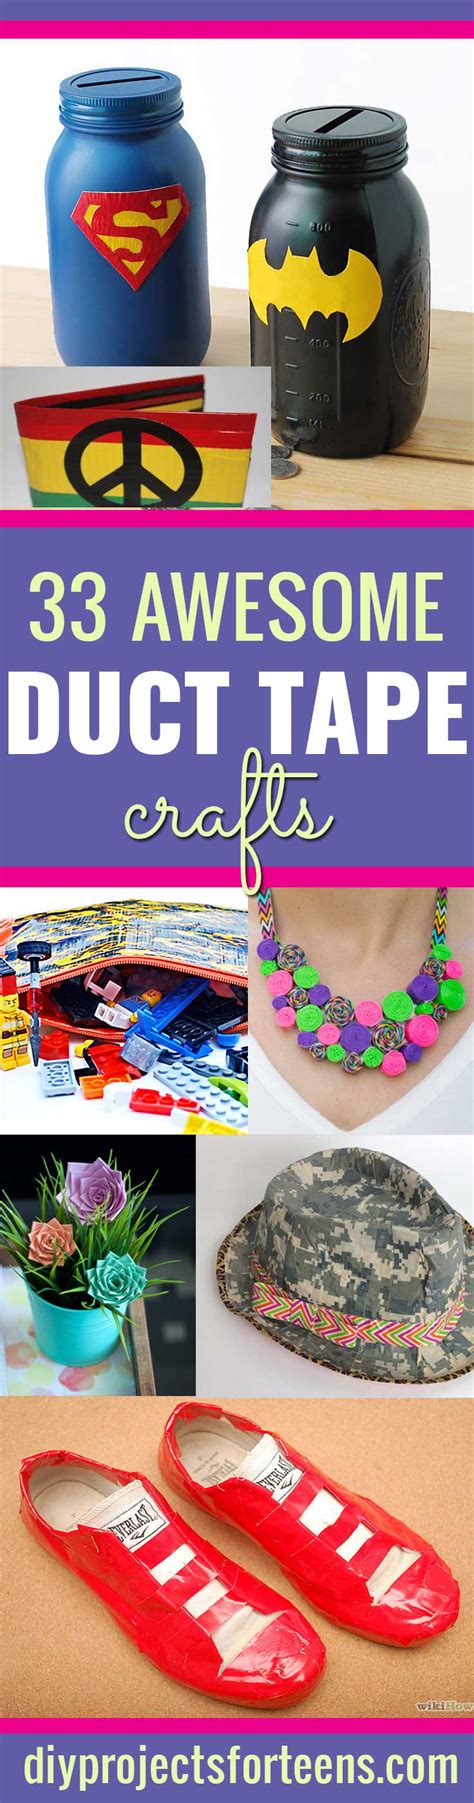 33 Awesome DIY Duct Tape Projects and Crafts